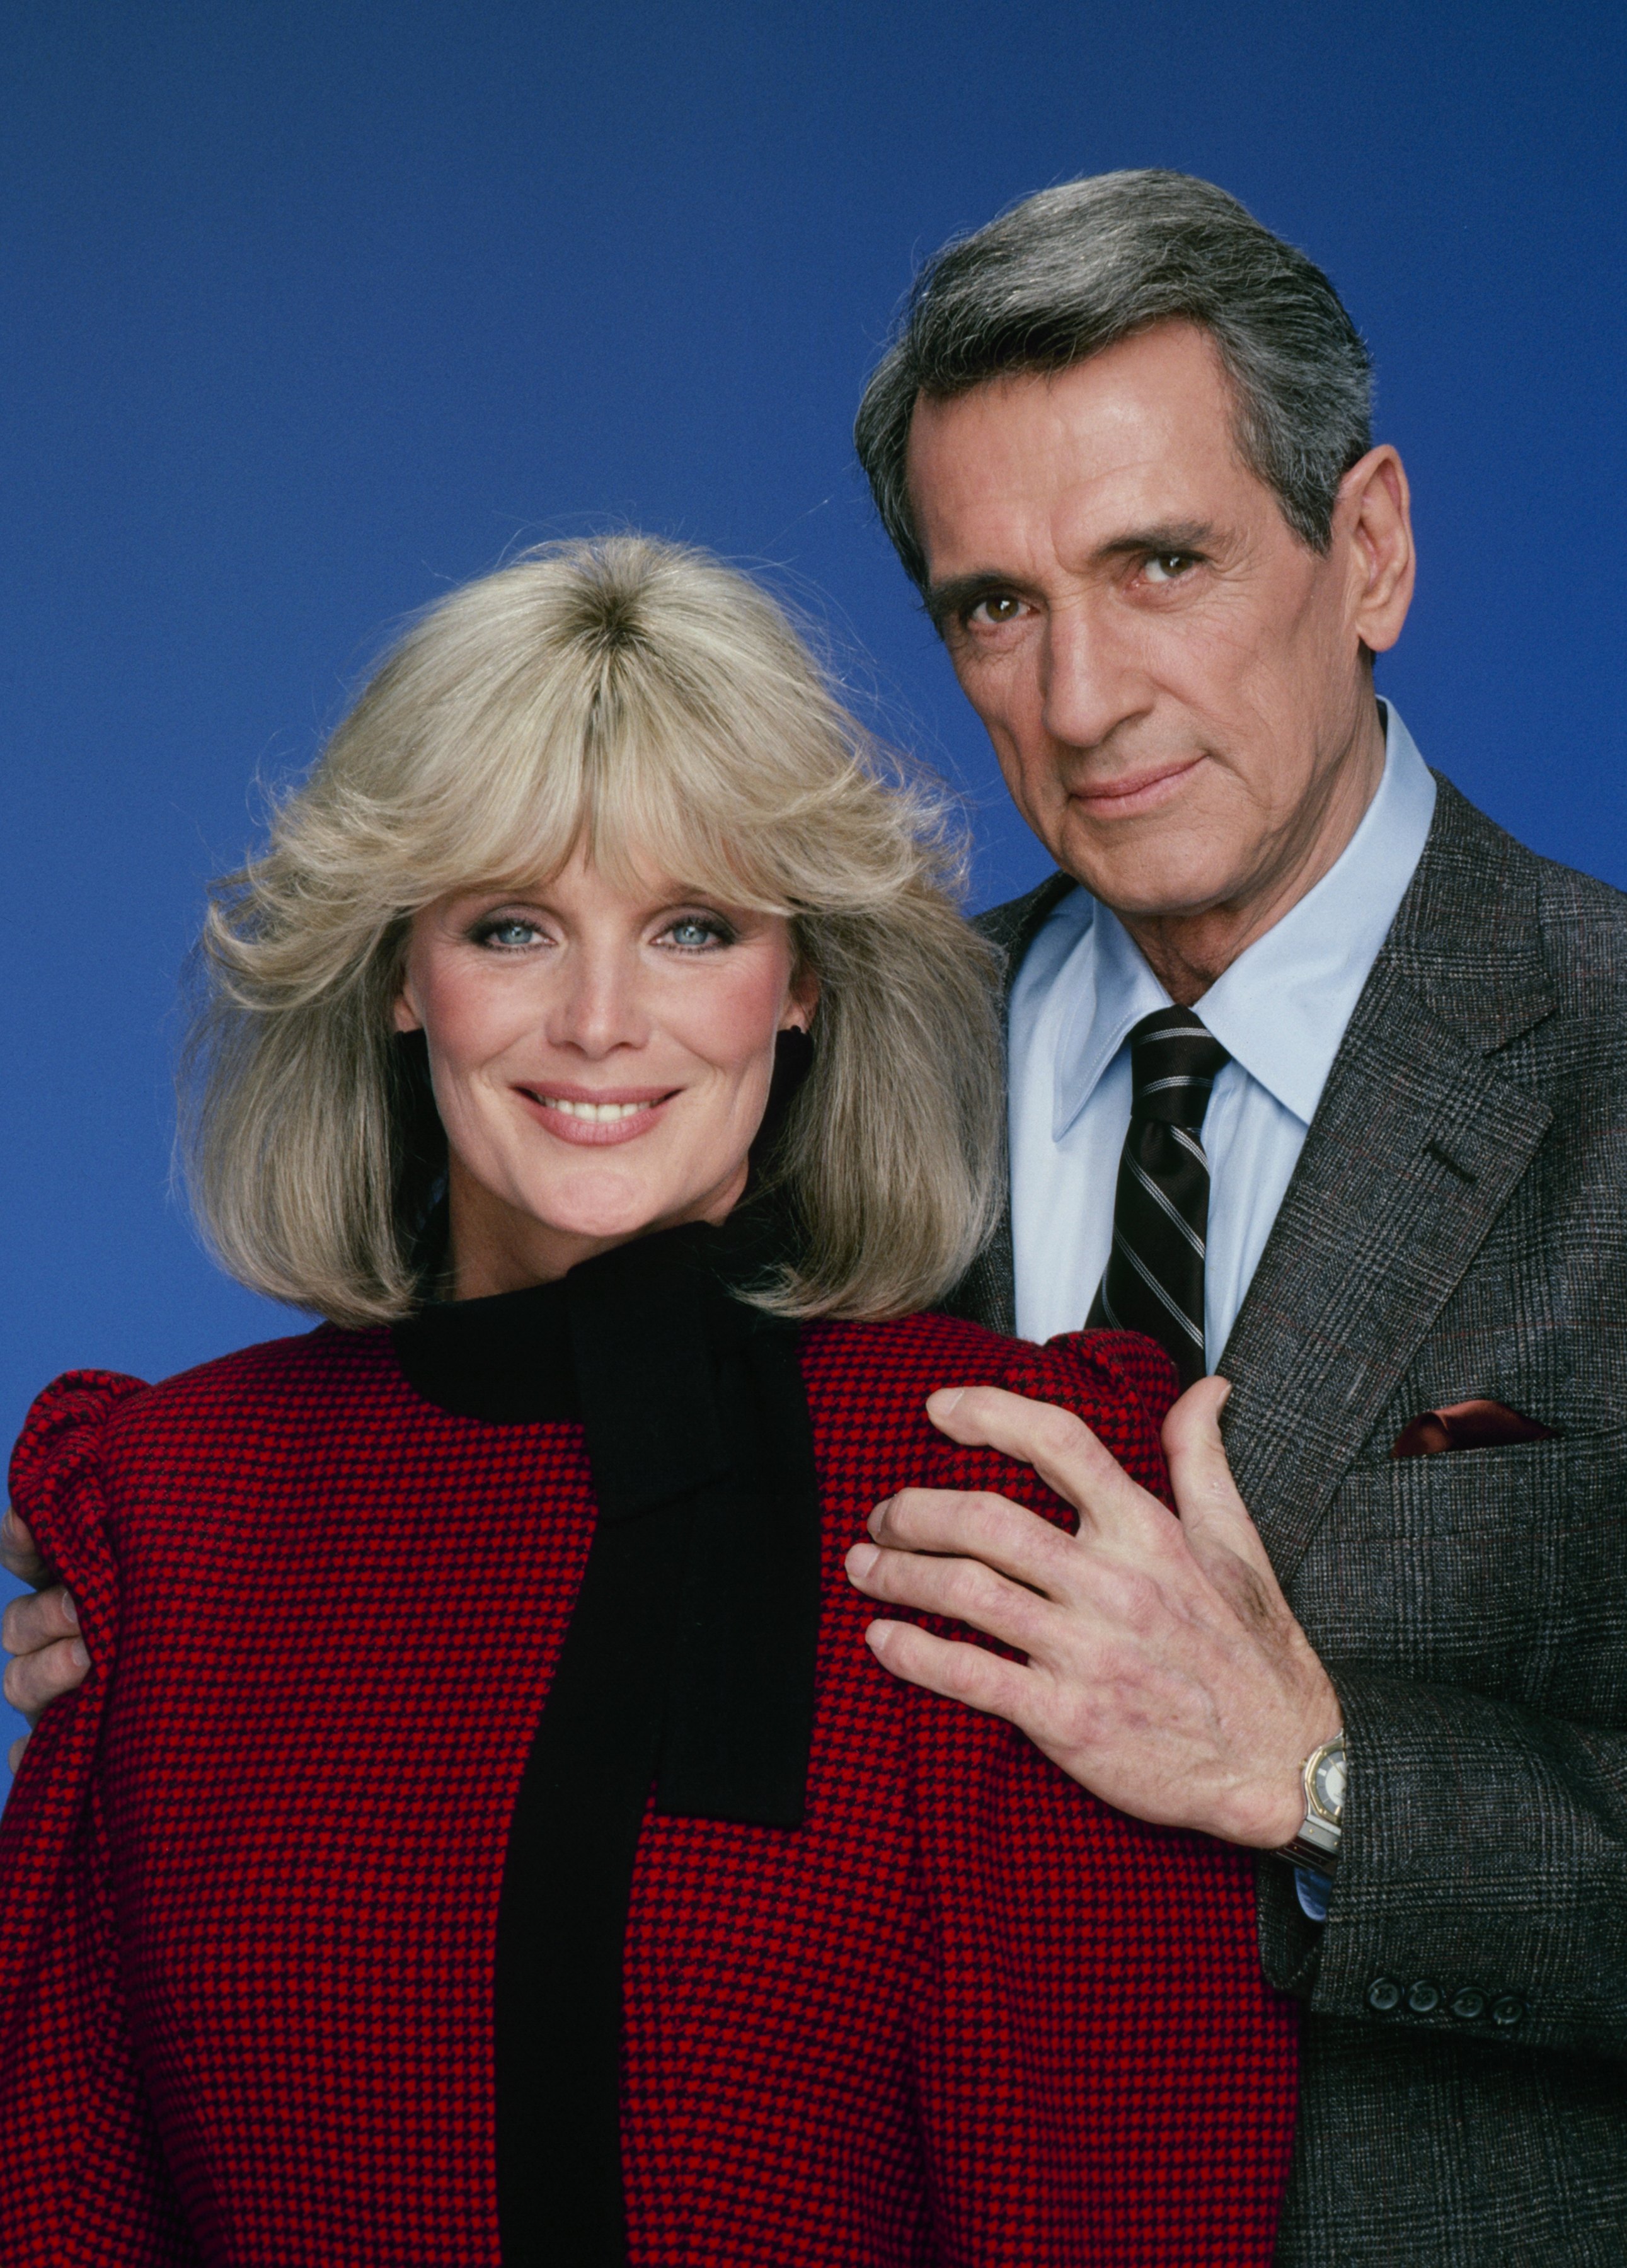 Linda Evans and Rock Hudson in a promotional shoot for "Dynasty" in 1984. | Source: Getty Images